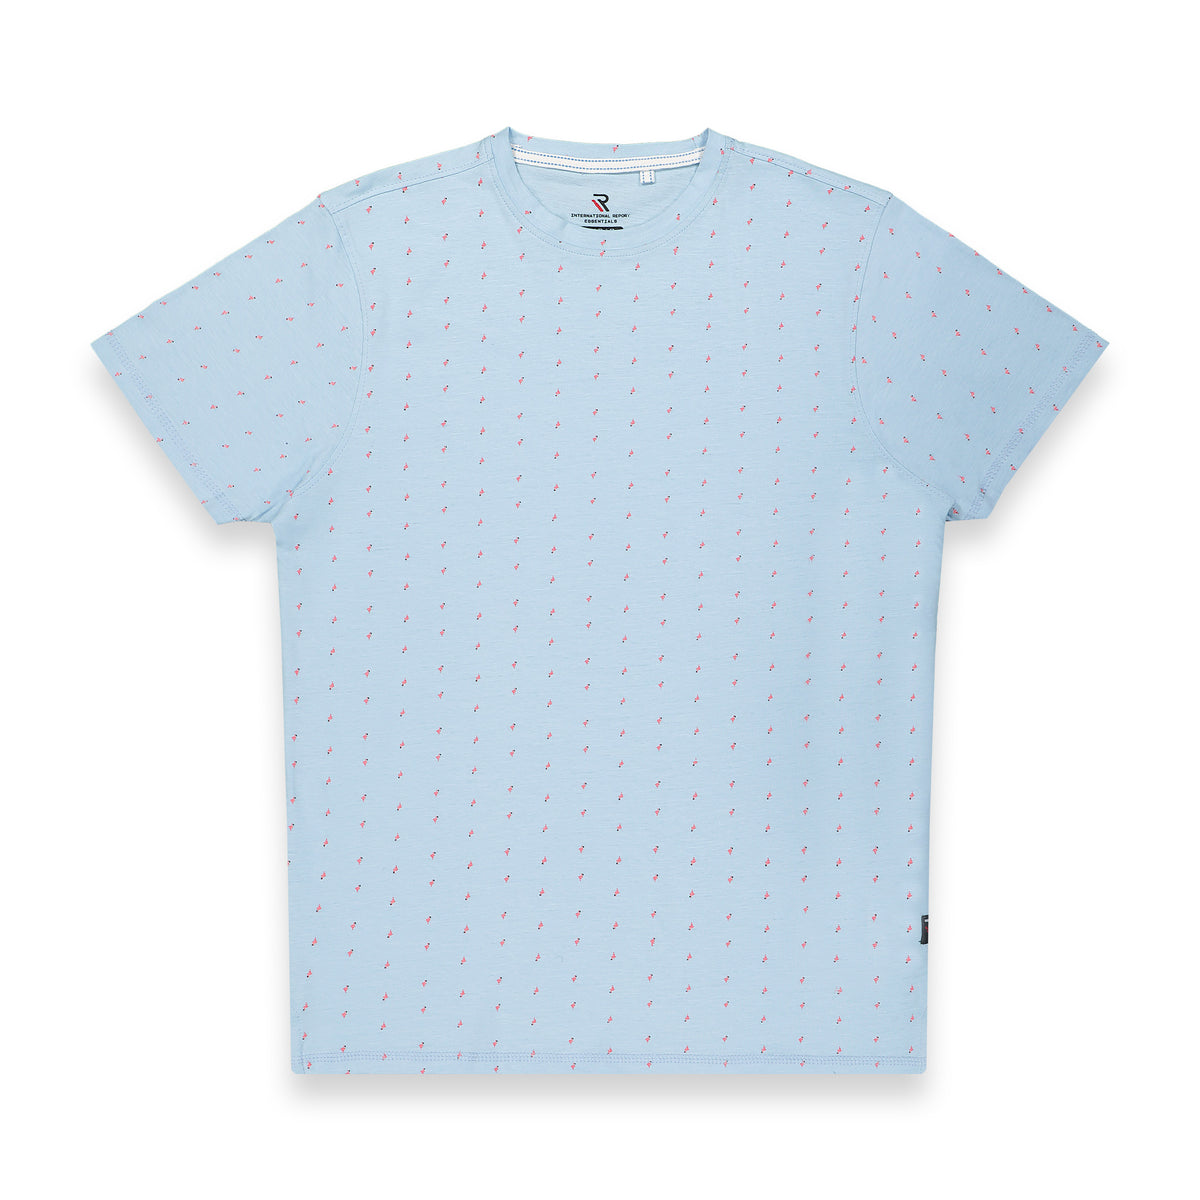 Front View of Short Sleeve Shirt with Flamingo Print in Blue